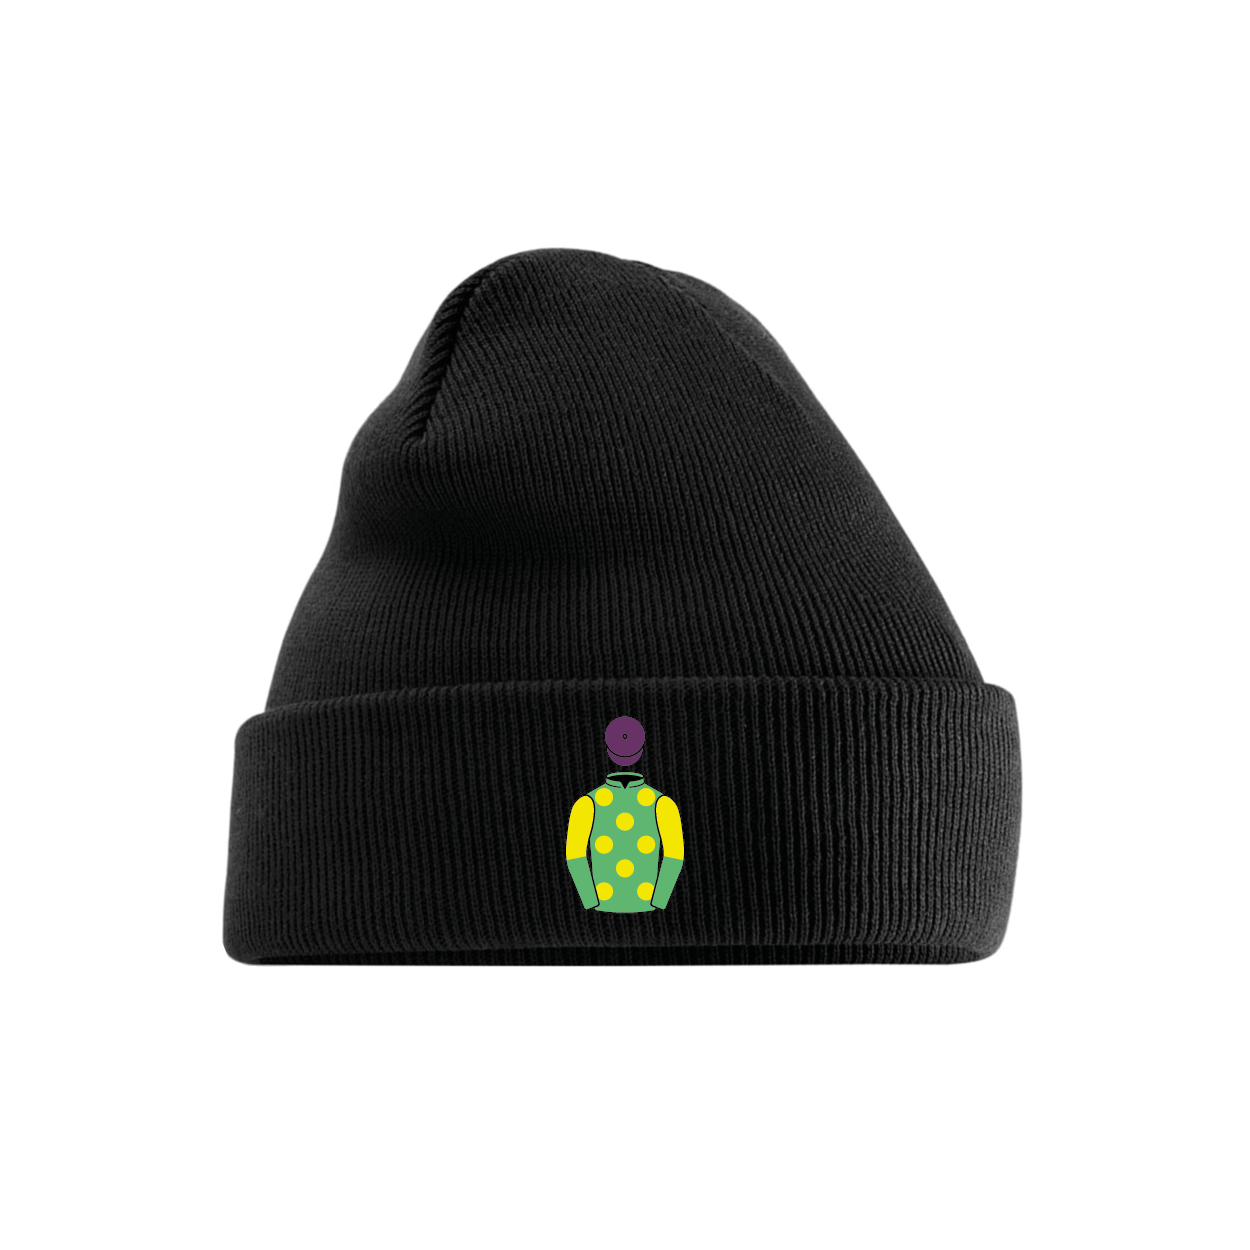 Clive Smith Embroidered Cuffed Beanie - Hacked Up